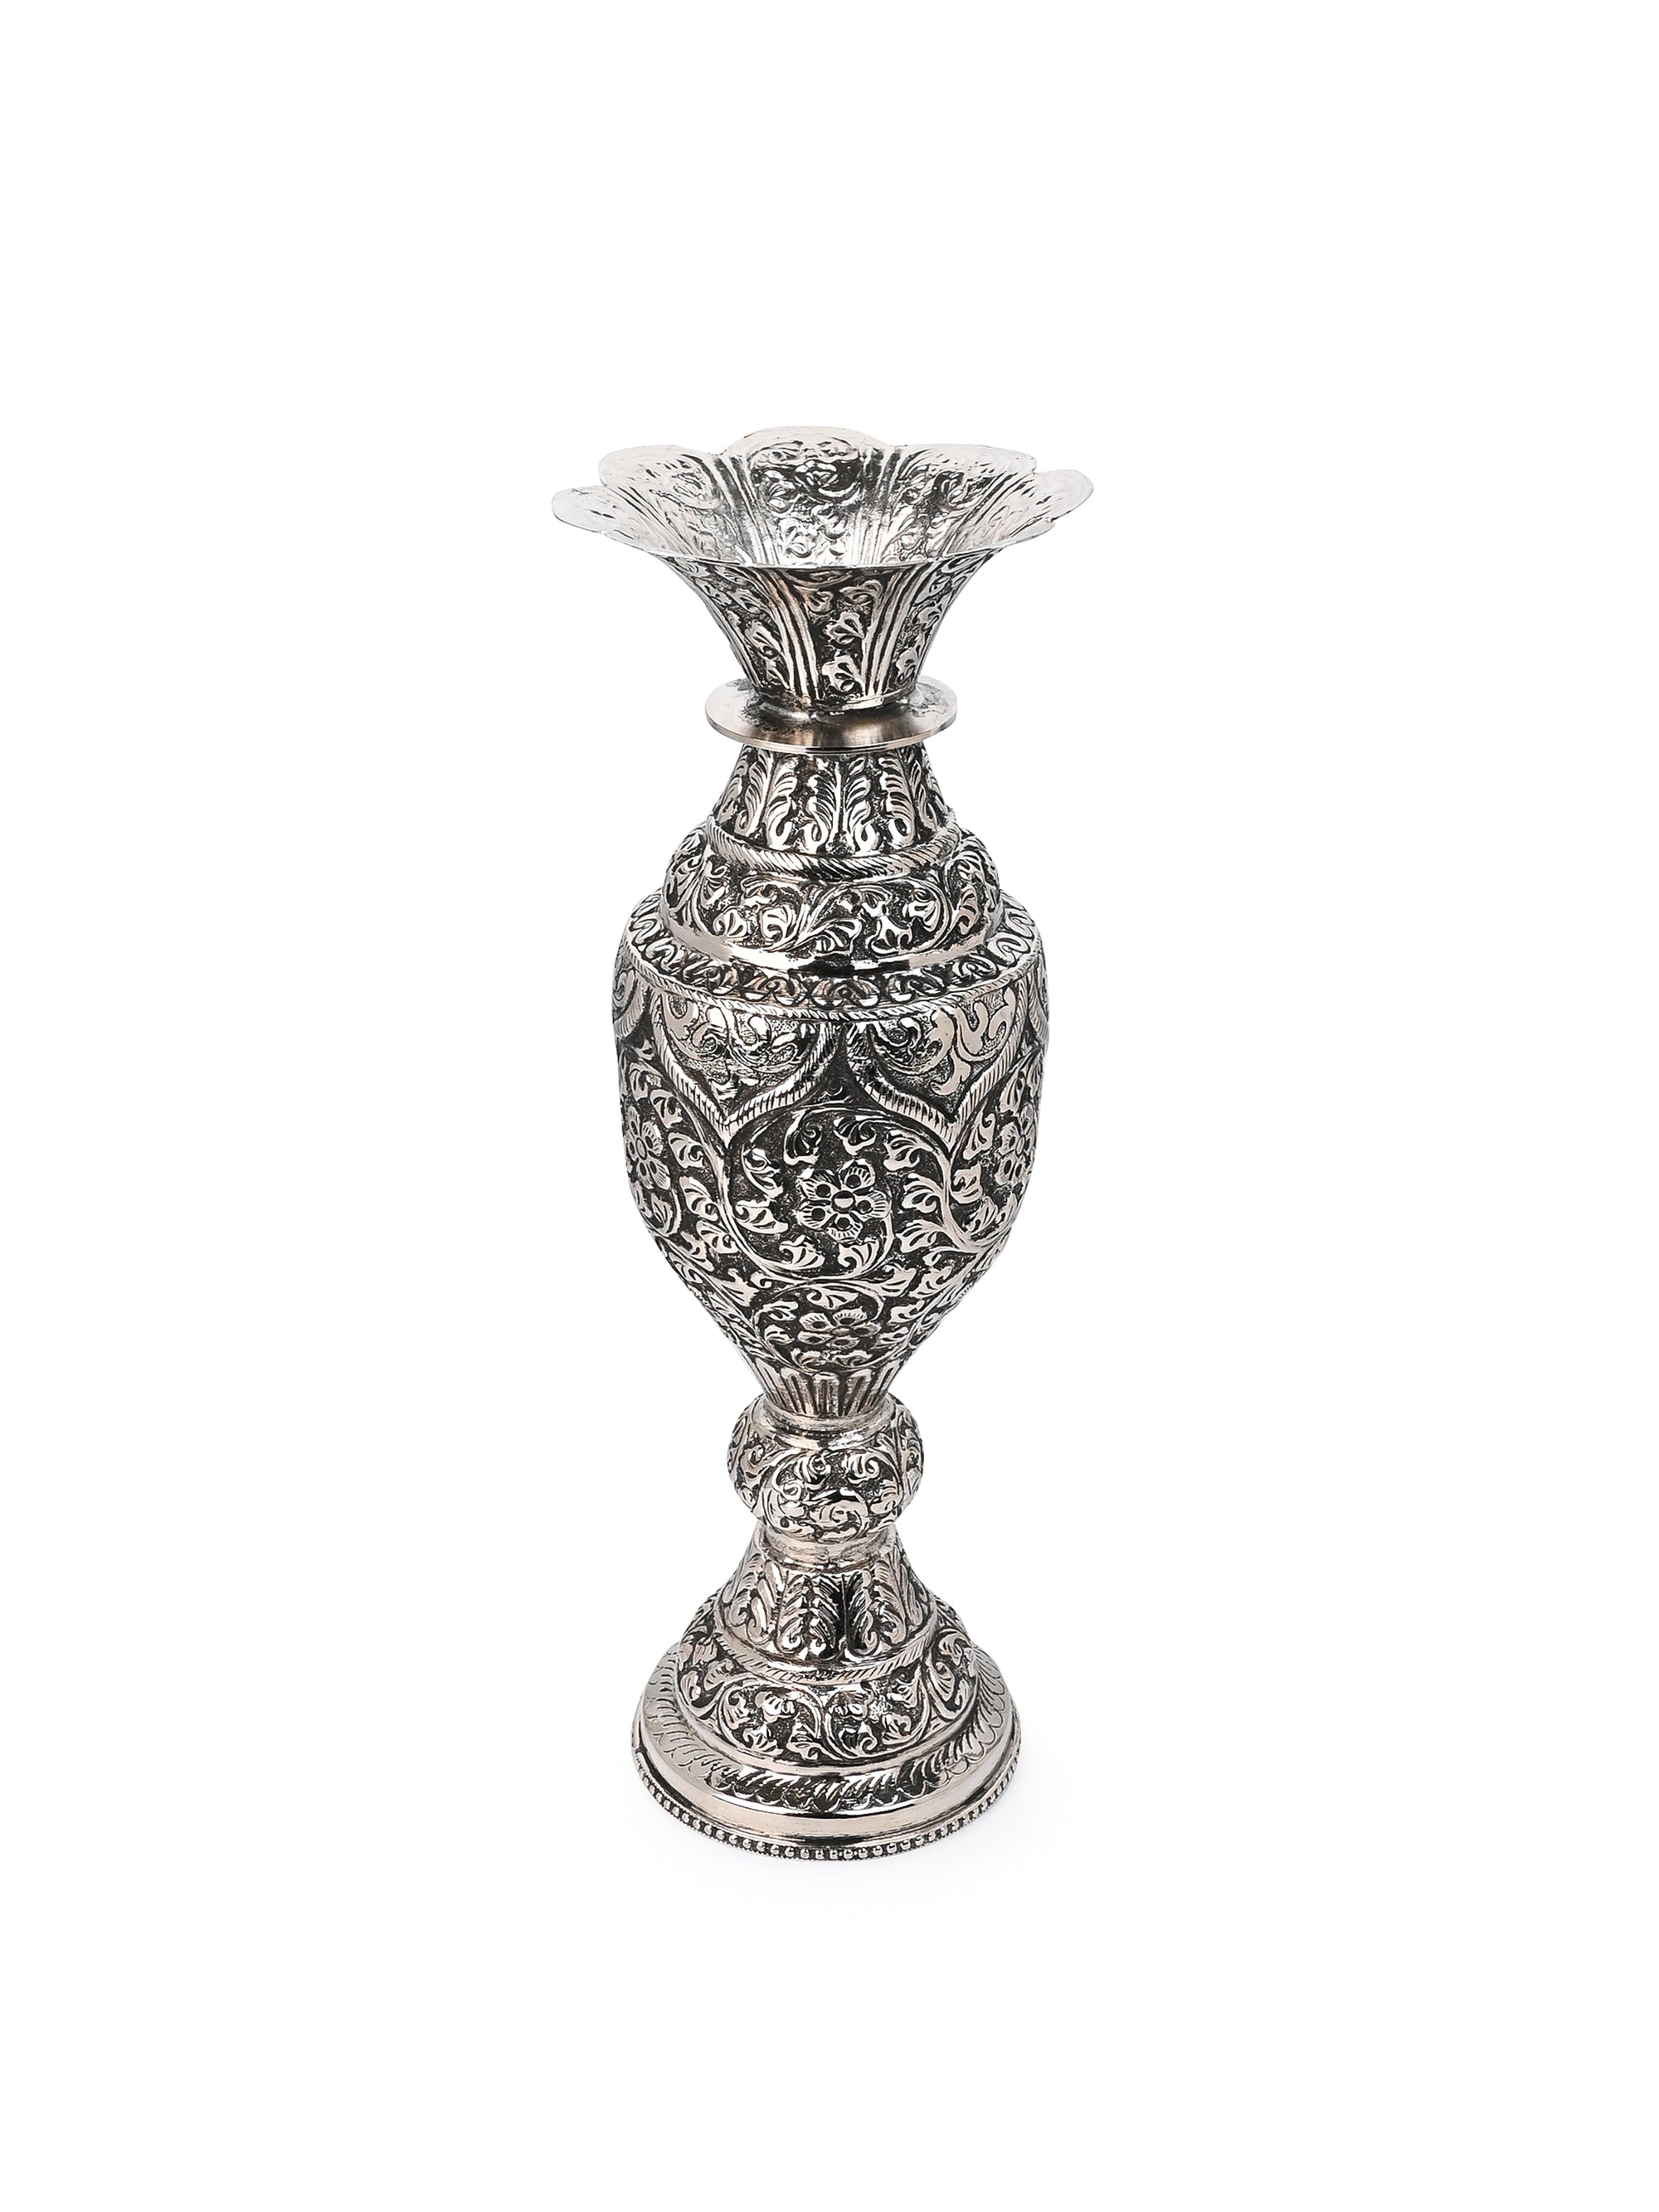 Antique Finish Oxidized Silver Stylish Flower Vase for Home Office Decor - 12 inches